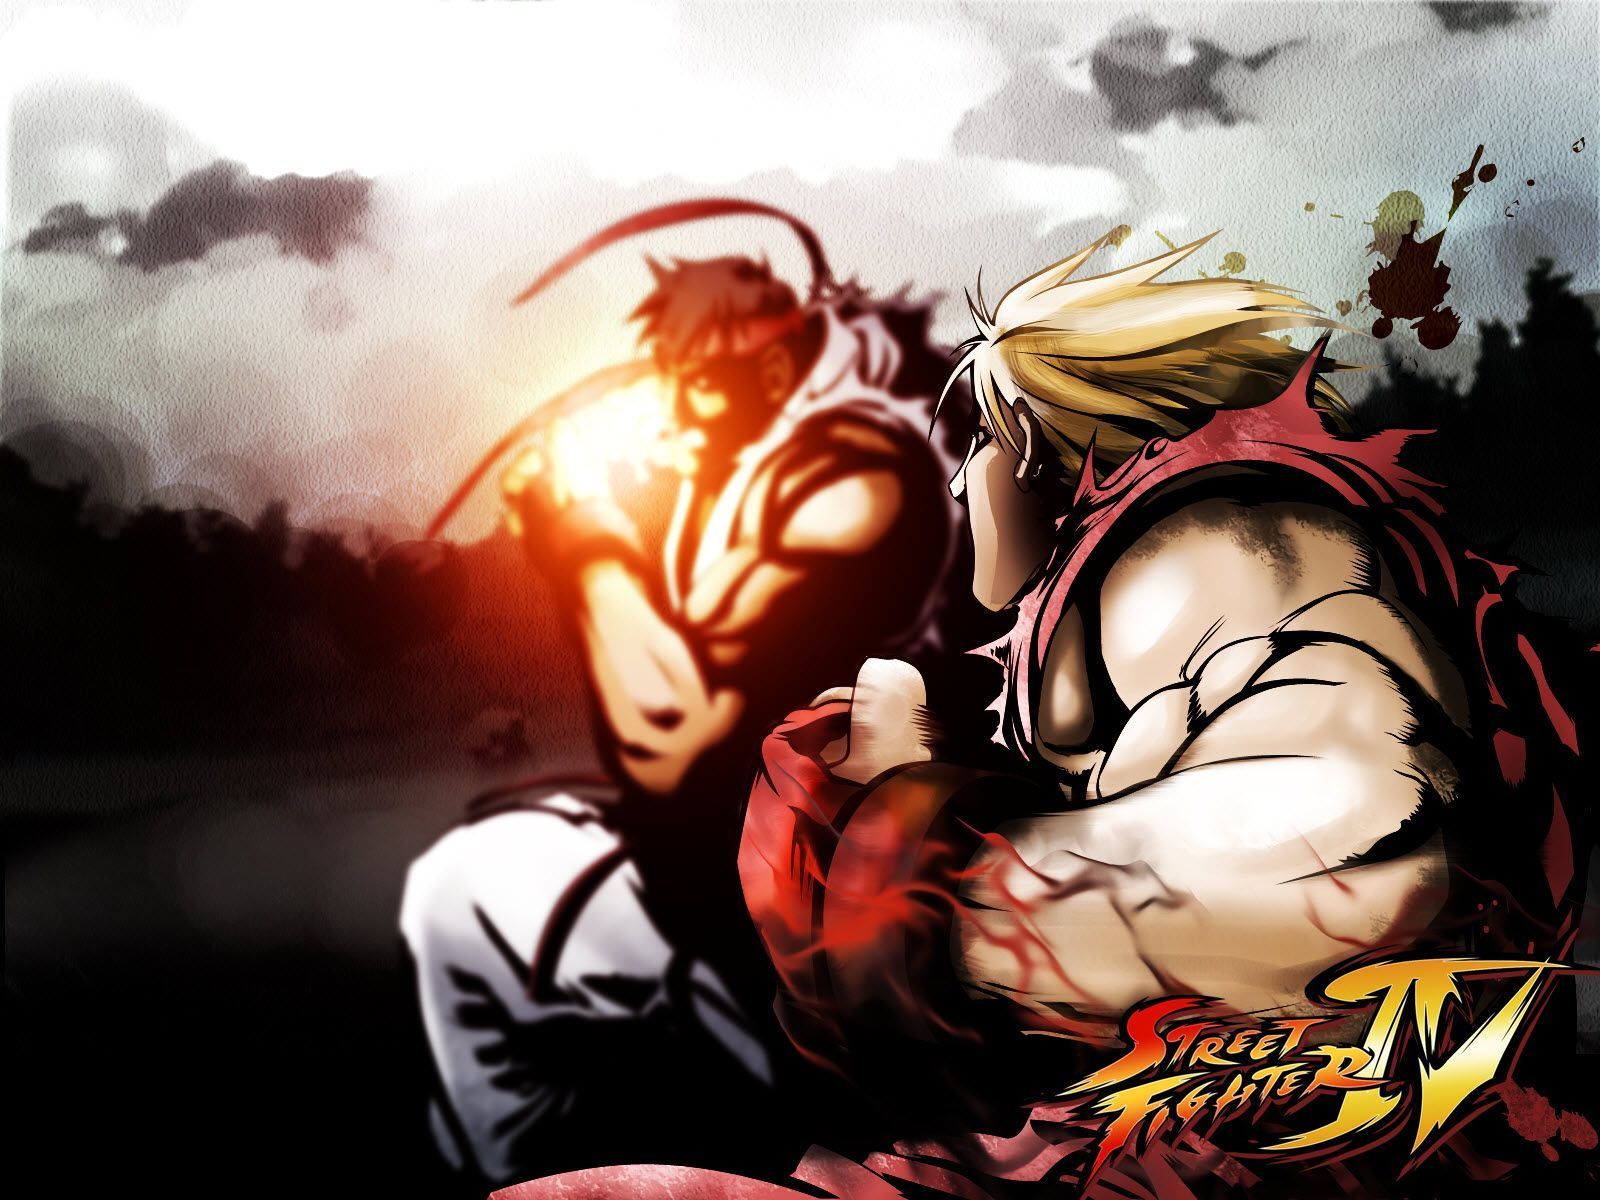 Street Fighter 4 Game Wallpapers HD Backgrounds